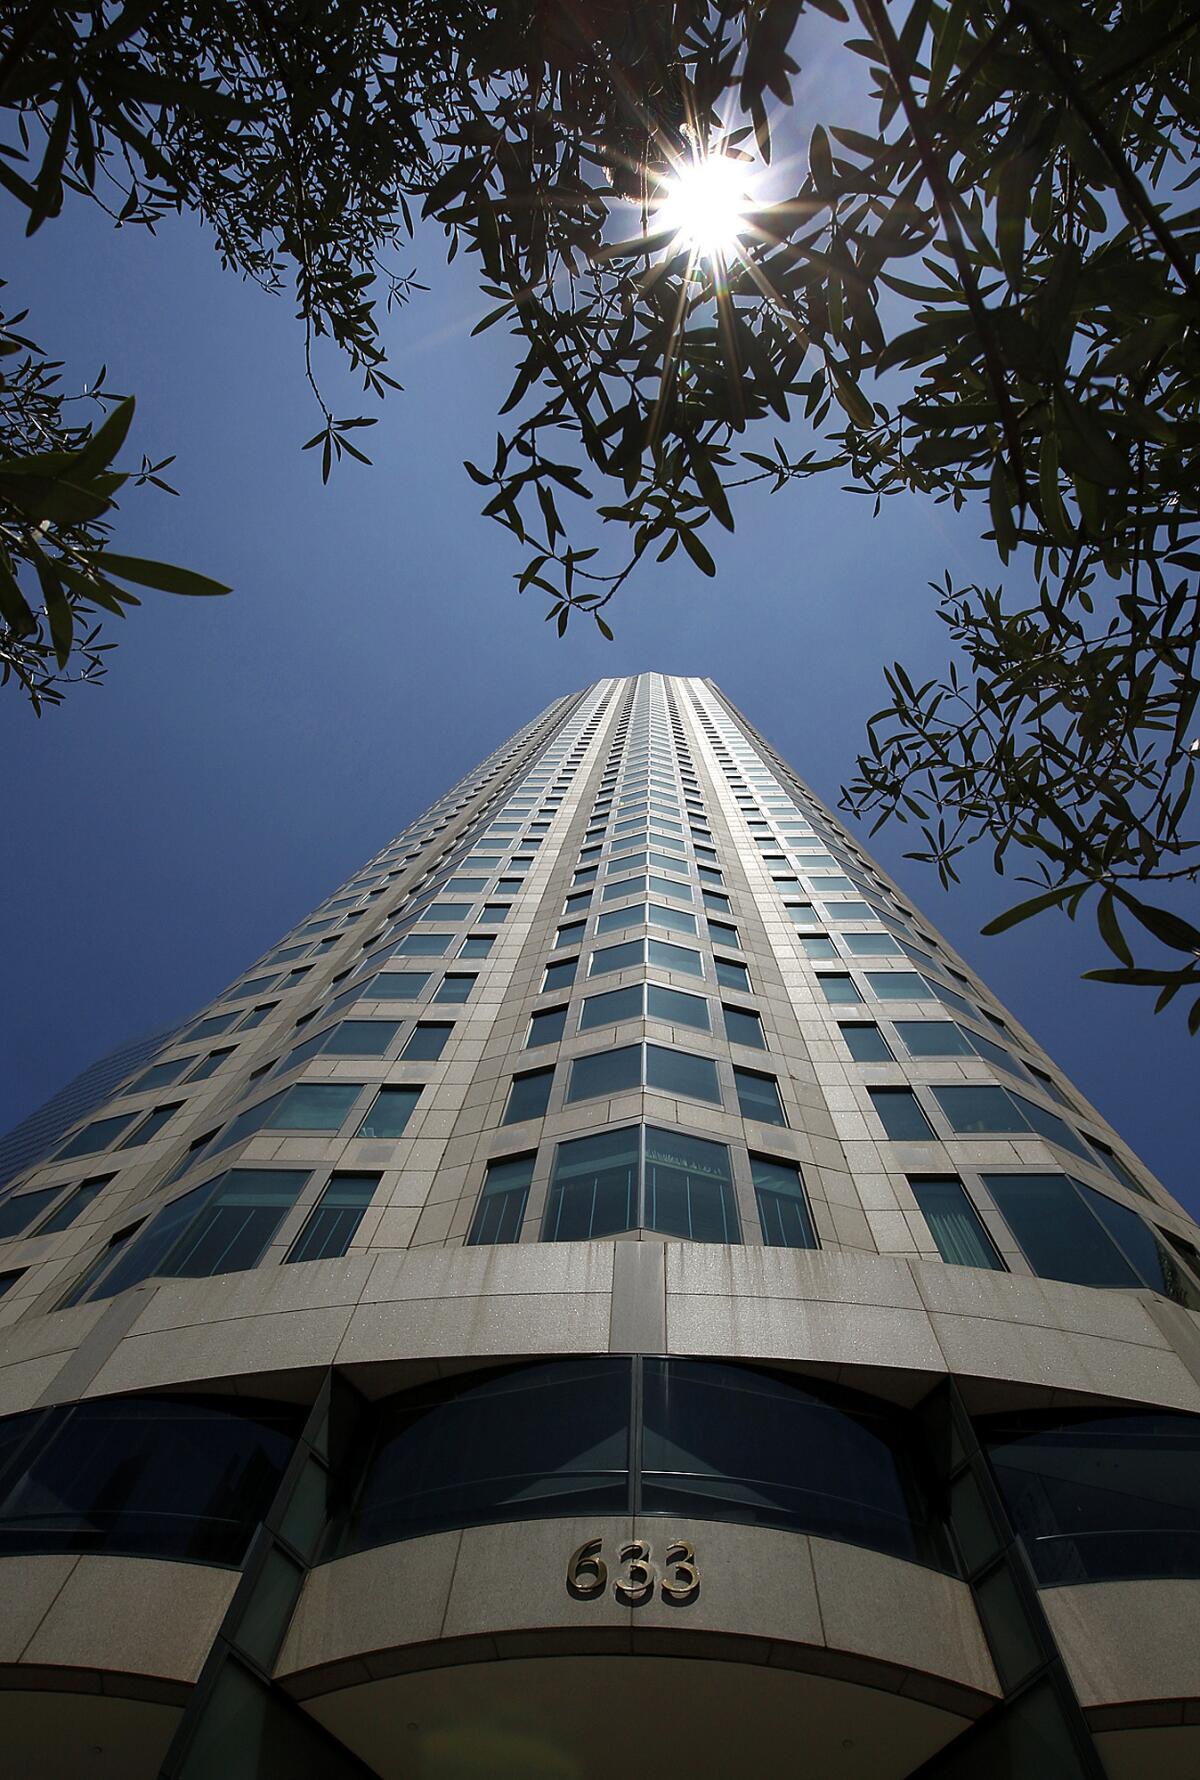 Occupying the top floor of the U.S. Bank Tower in downtown Los Angeles is DTI Services, a company that runs several Japanese porn websites. The company did not return numerous calls asking about the office, its views or a possible tour.